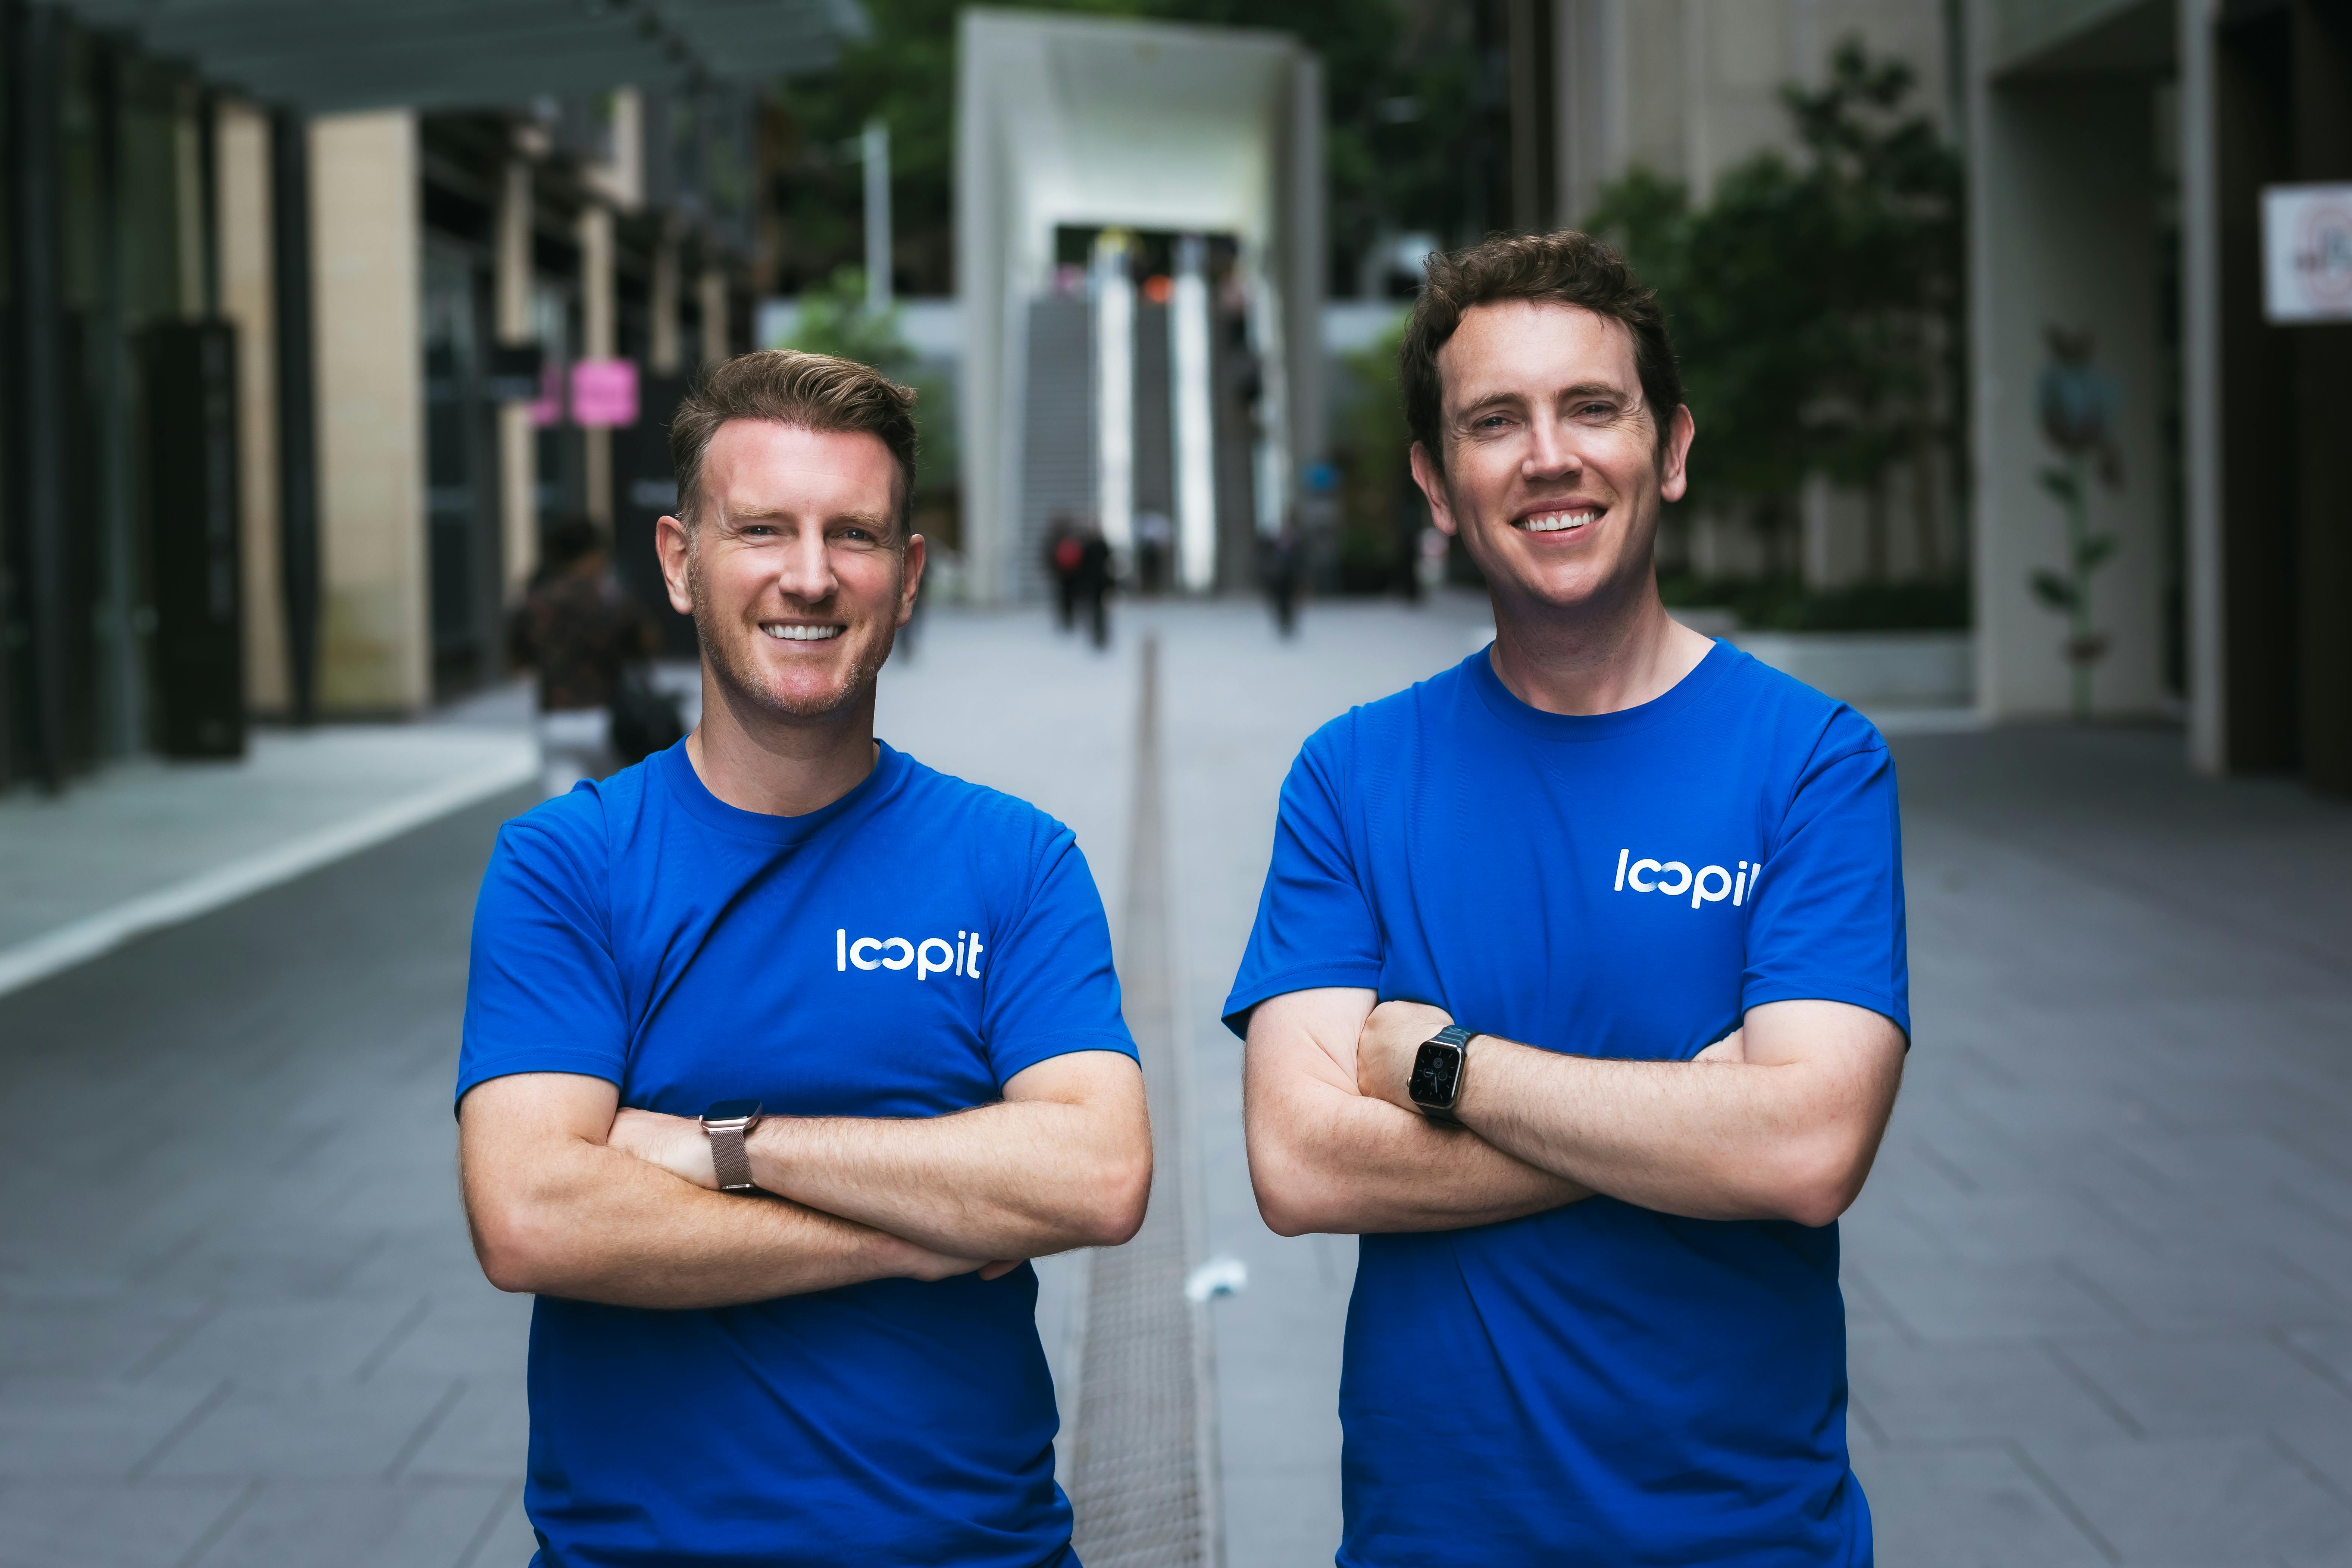 Loopit Founders Paul (LHS) and Michael Higgins